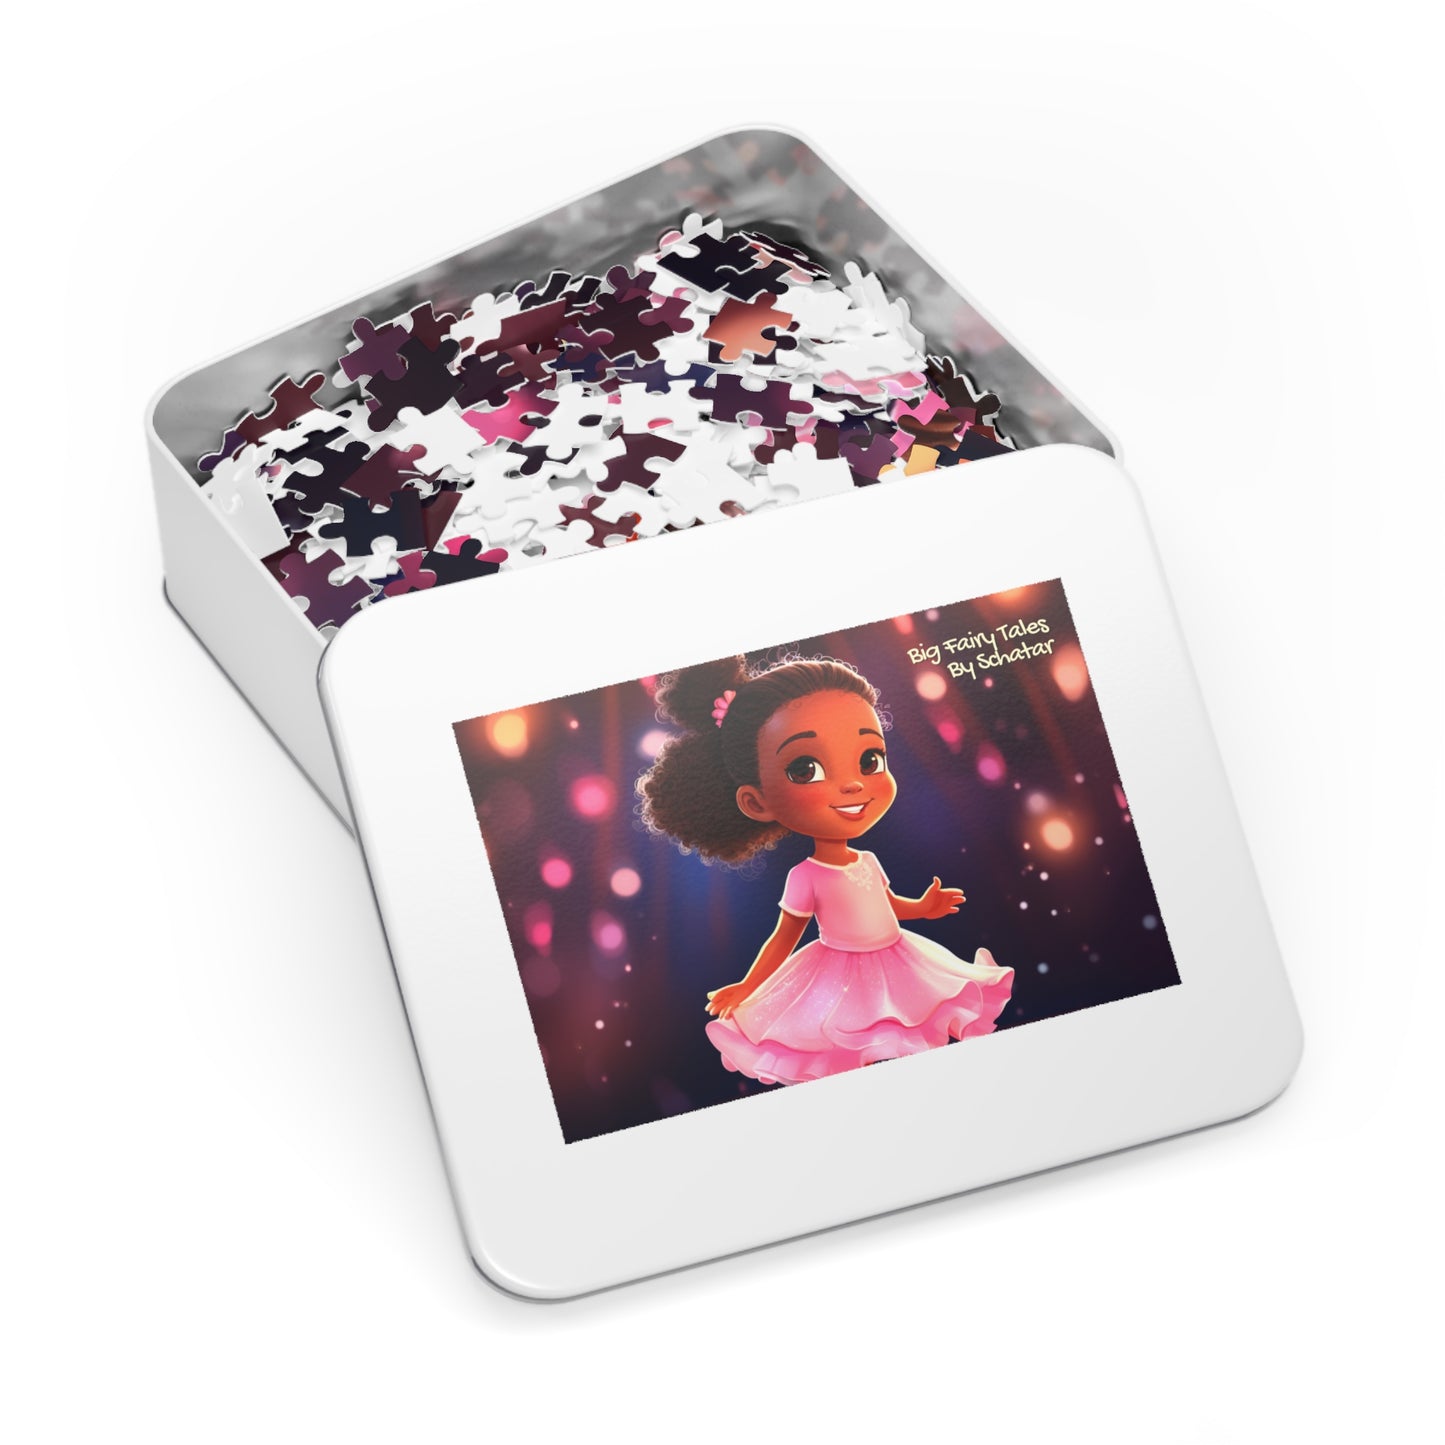 Prima Ballerina - Big Little Professionals Puzzle 3 From Big Fairy Tales By Schatar